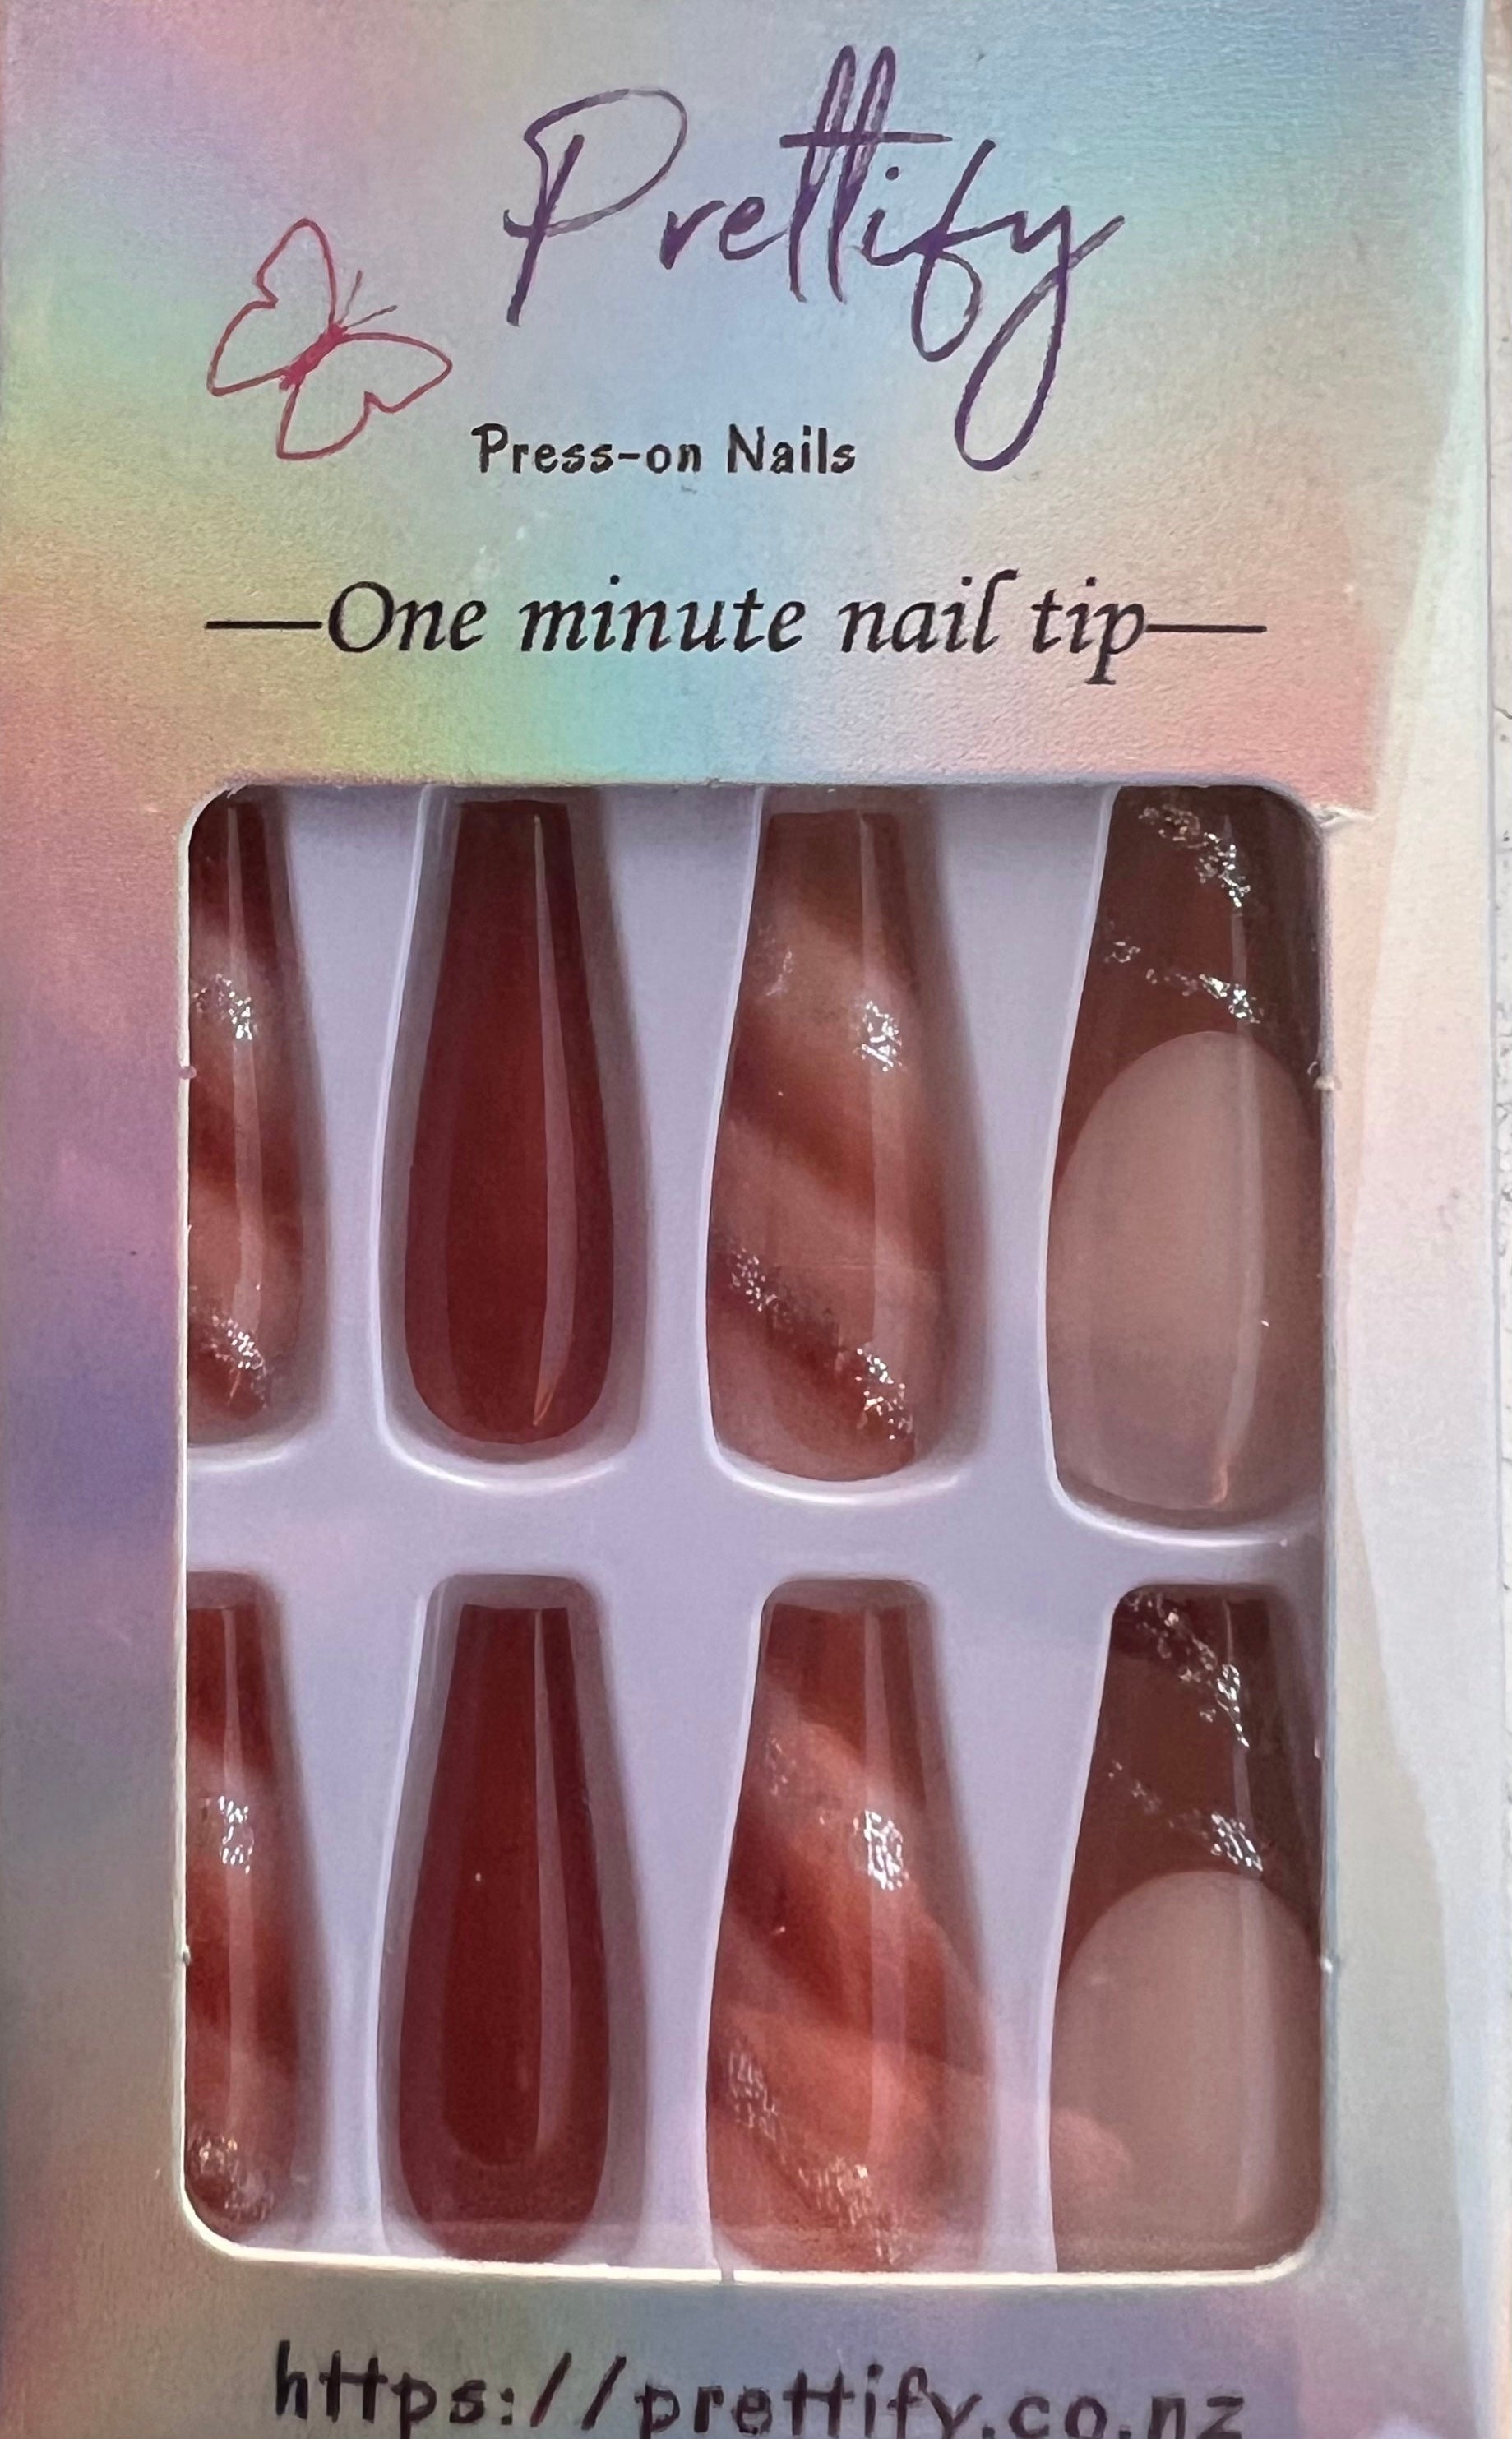 Long Coffin Press on Nails. Tan & Tan & Cream Stripes with Glitter. Easy and quick to apply. Great for those special occasions, parties or add an edge to any outfit. Gorgeous, flattering and you can re-use them again and again.